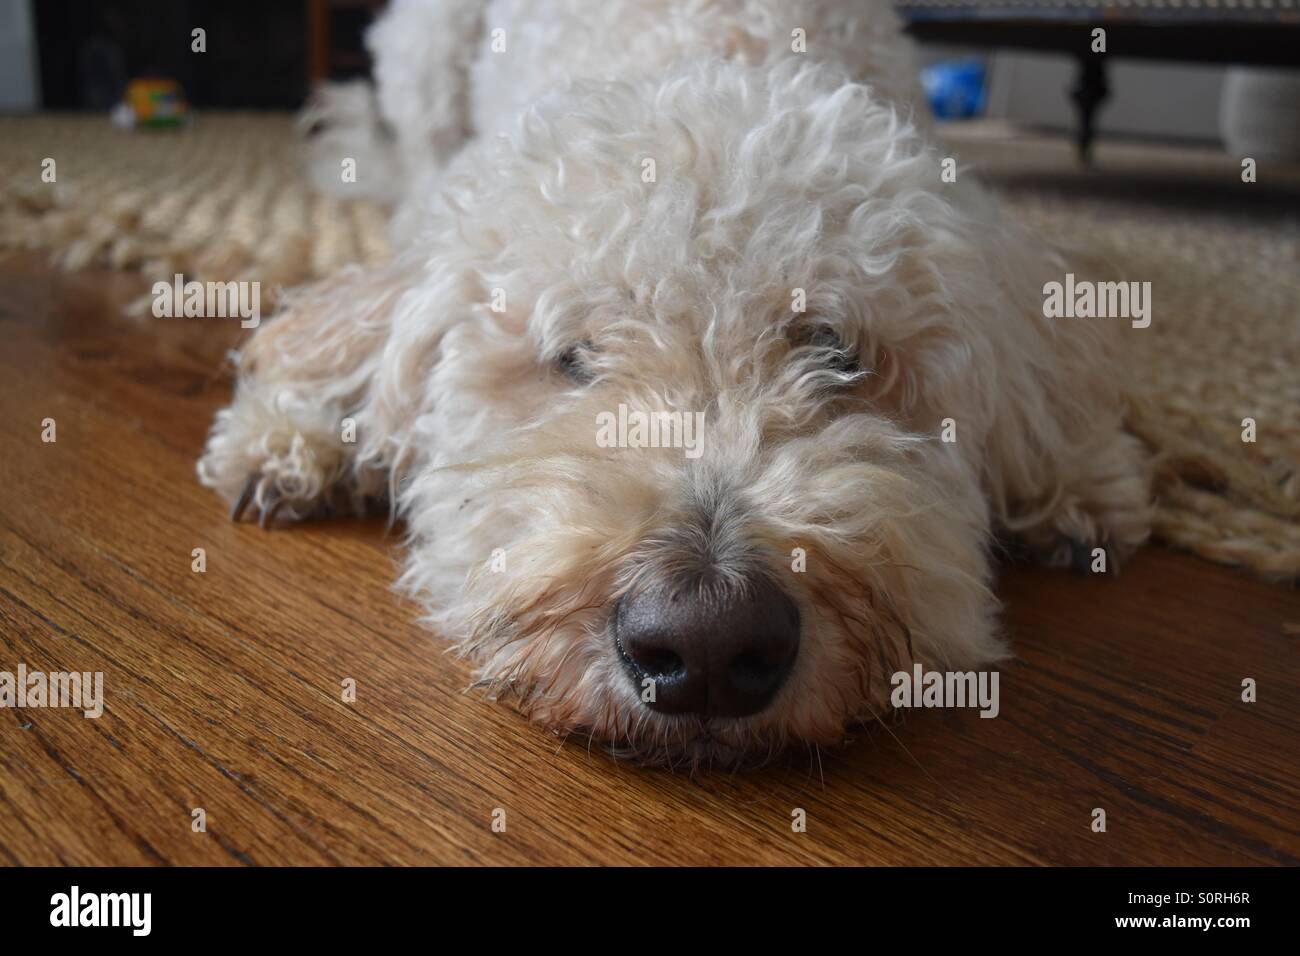 Nice doggy laying down on the floor Stock Photo